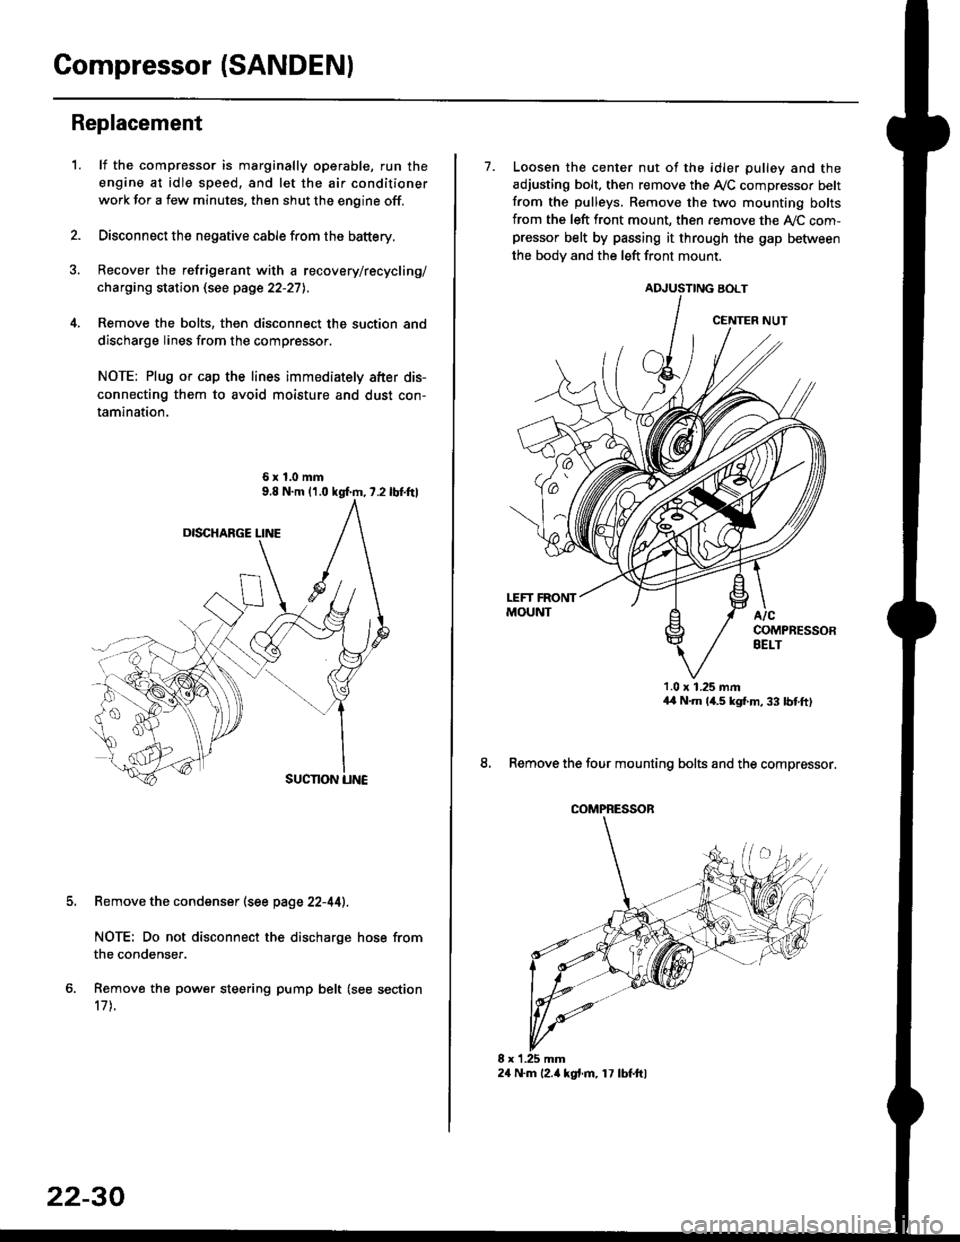 HONDA CIVIC 1996 6.G User Guide Compressor (SANDENI
Replacement
1.lf the compressor is marginally operable, run the
engine at idle speed, and let the air conditioner
work for a few minutes. then shut the engine off.
Disconnect the n